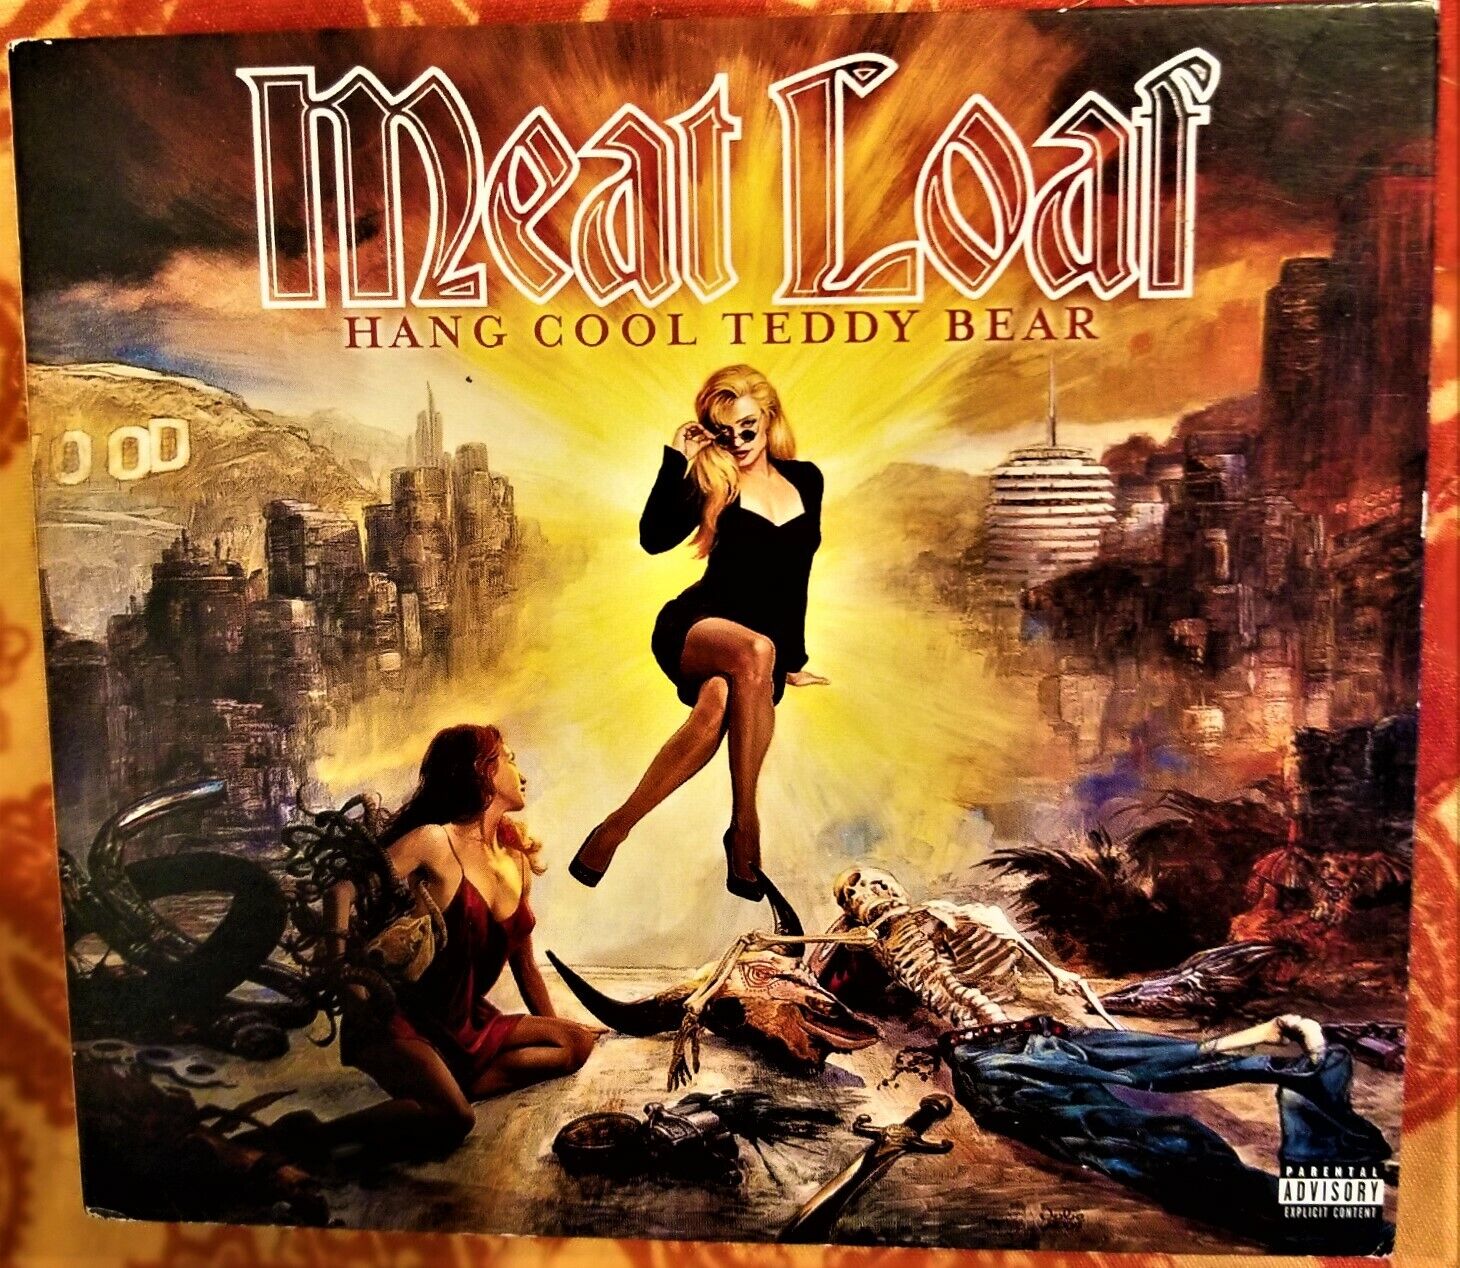 Meat Loaf- HANG COOL TEDDY BEAR CD MEATLOAF LIMITED DELUXE EDITION 2-DISC SET